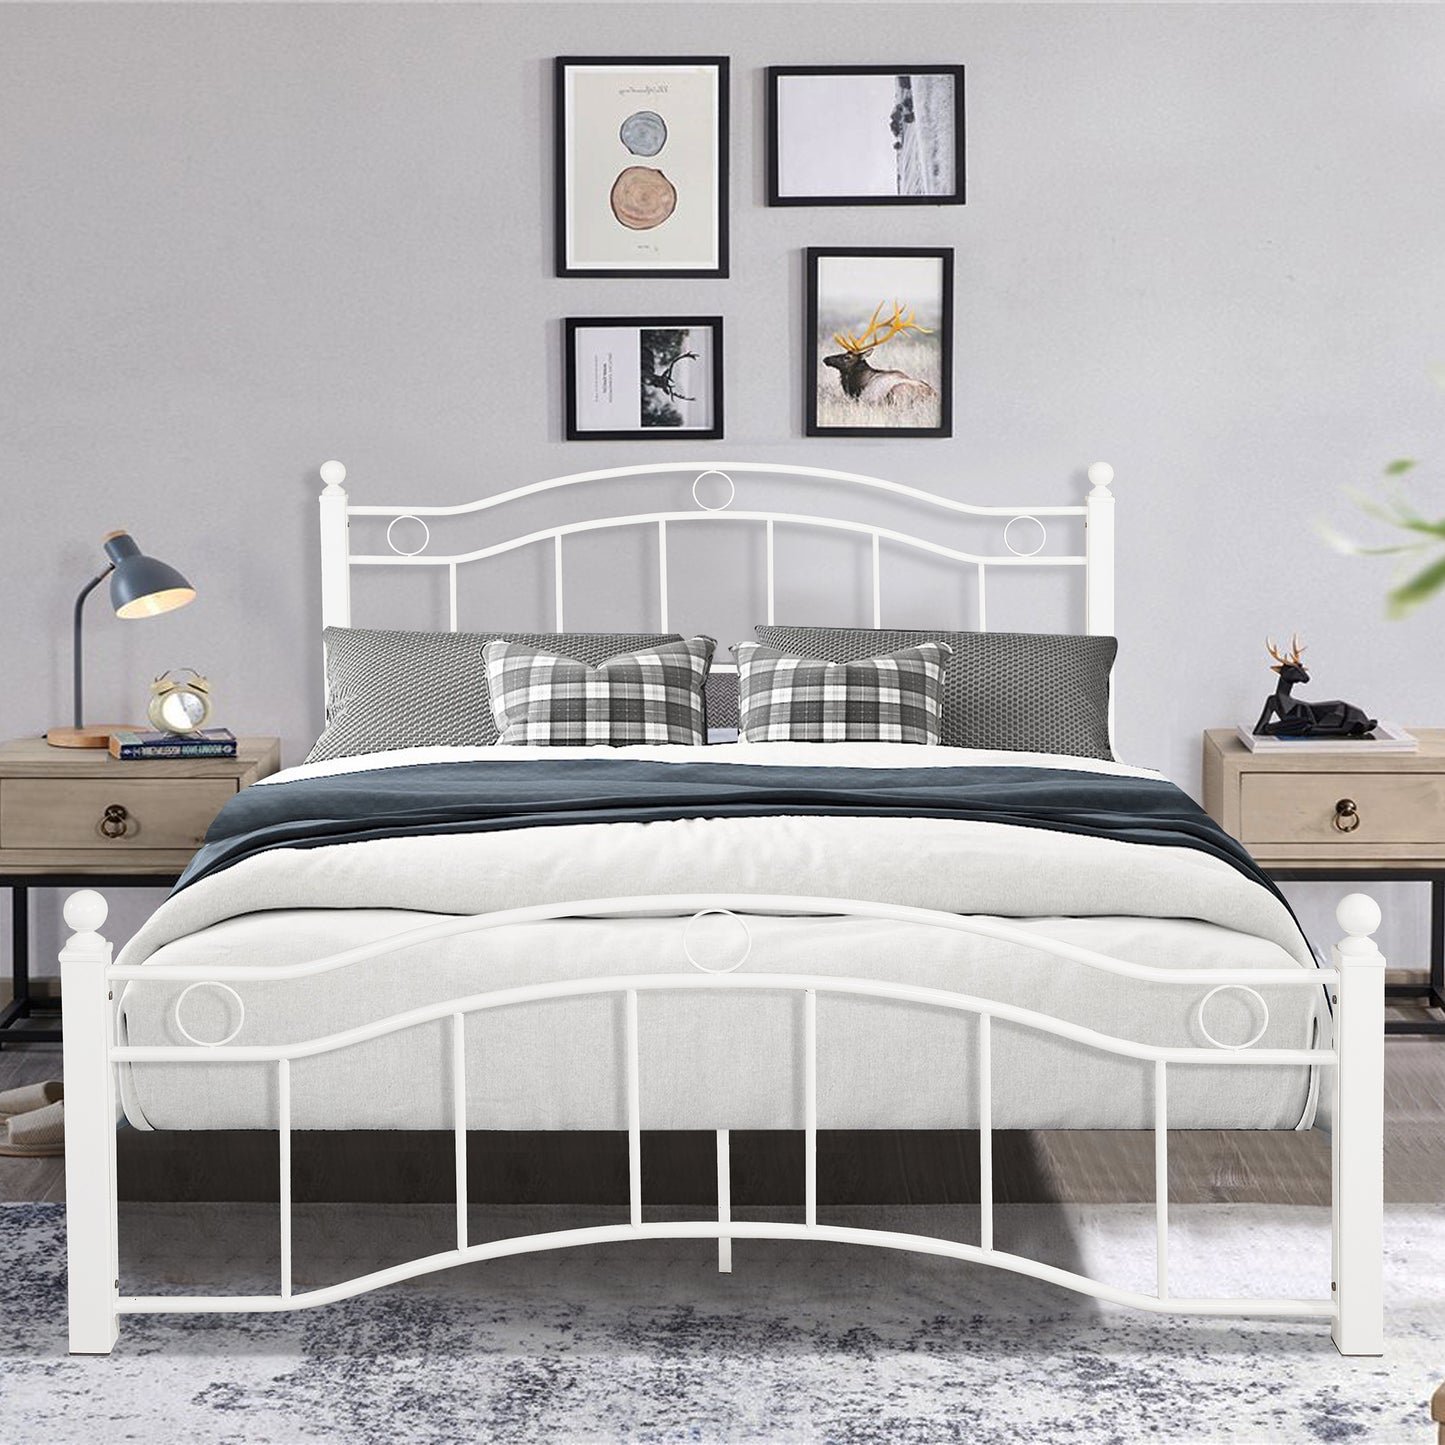 Queen Size Metal Platform Bed Frame with Headboard and Footboard - White